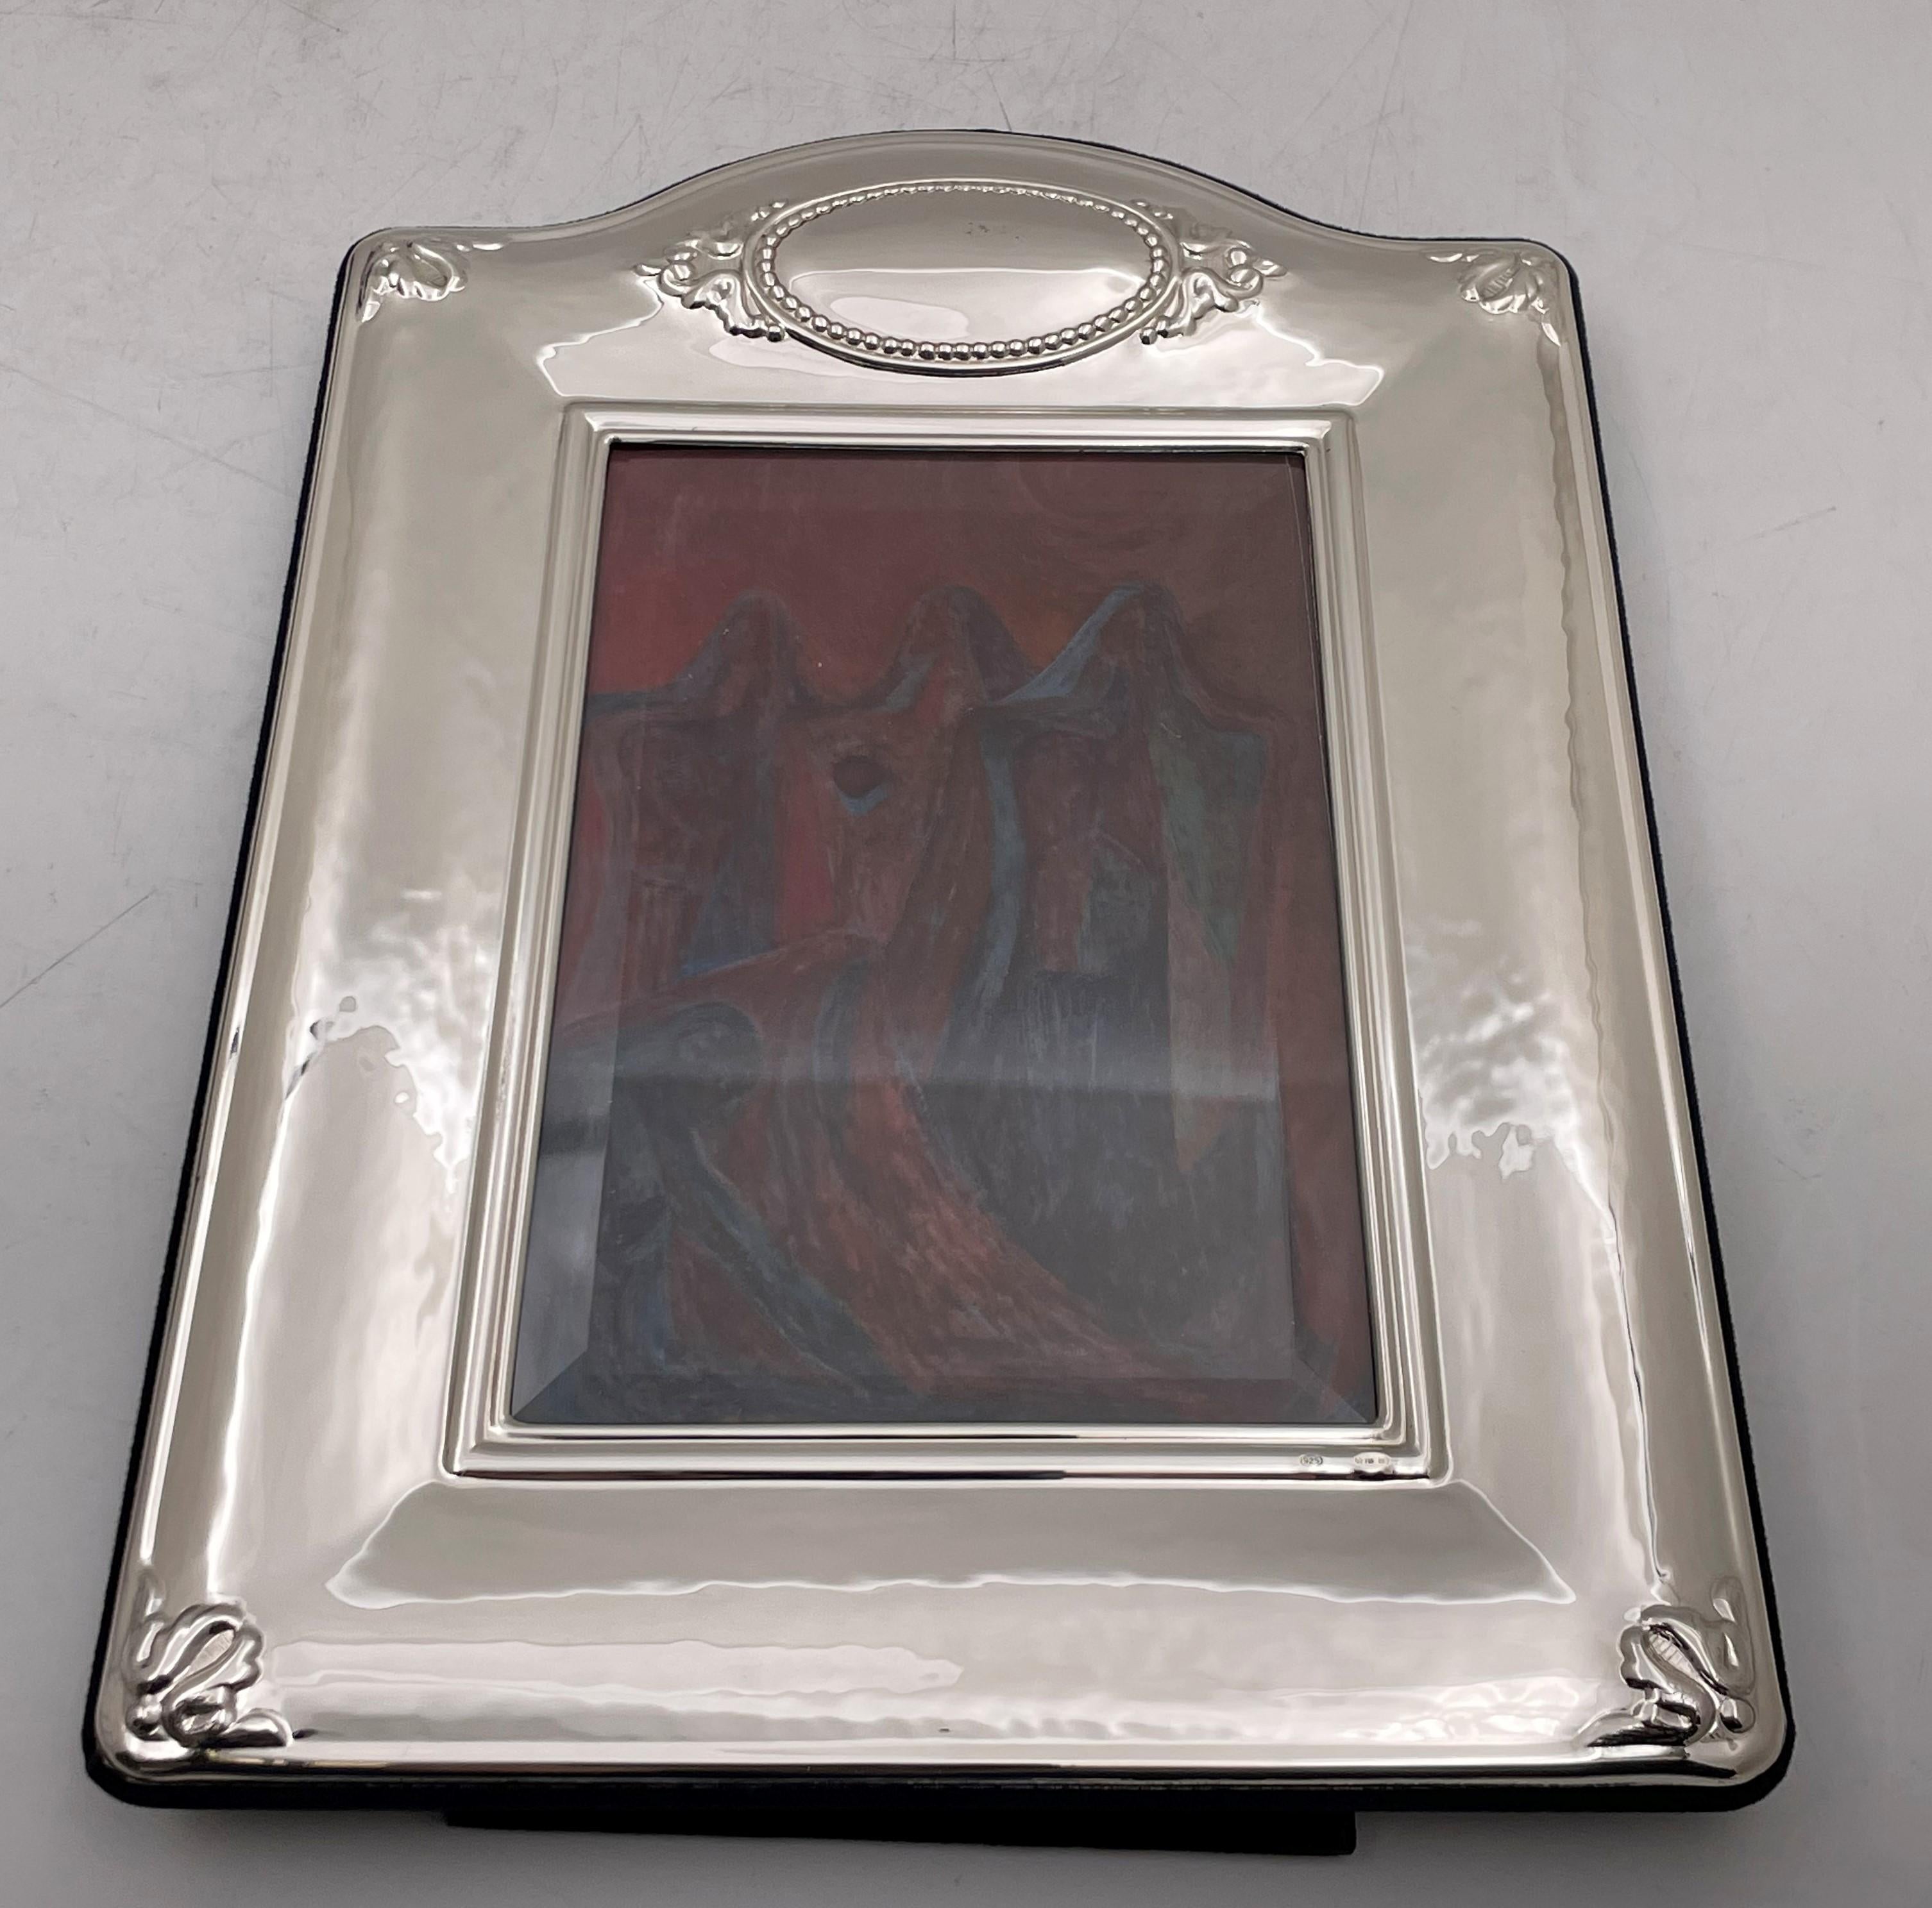 Del Conte sterling silver picture frame with beveled glass and felt back measuring 9 7/8'' by 7 1/8'' in outer dimensions (picture size is 3 3/4'' by 5 3/4''). Brand new. 

Del Conte was established in the 1940s in an artisan shop located in the